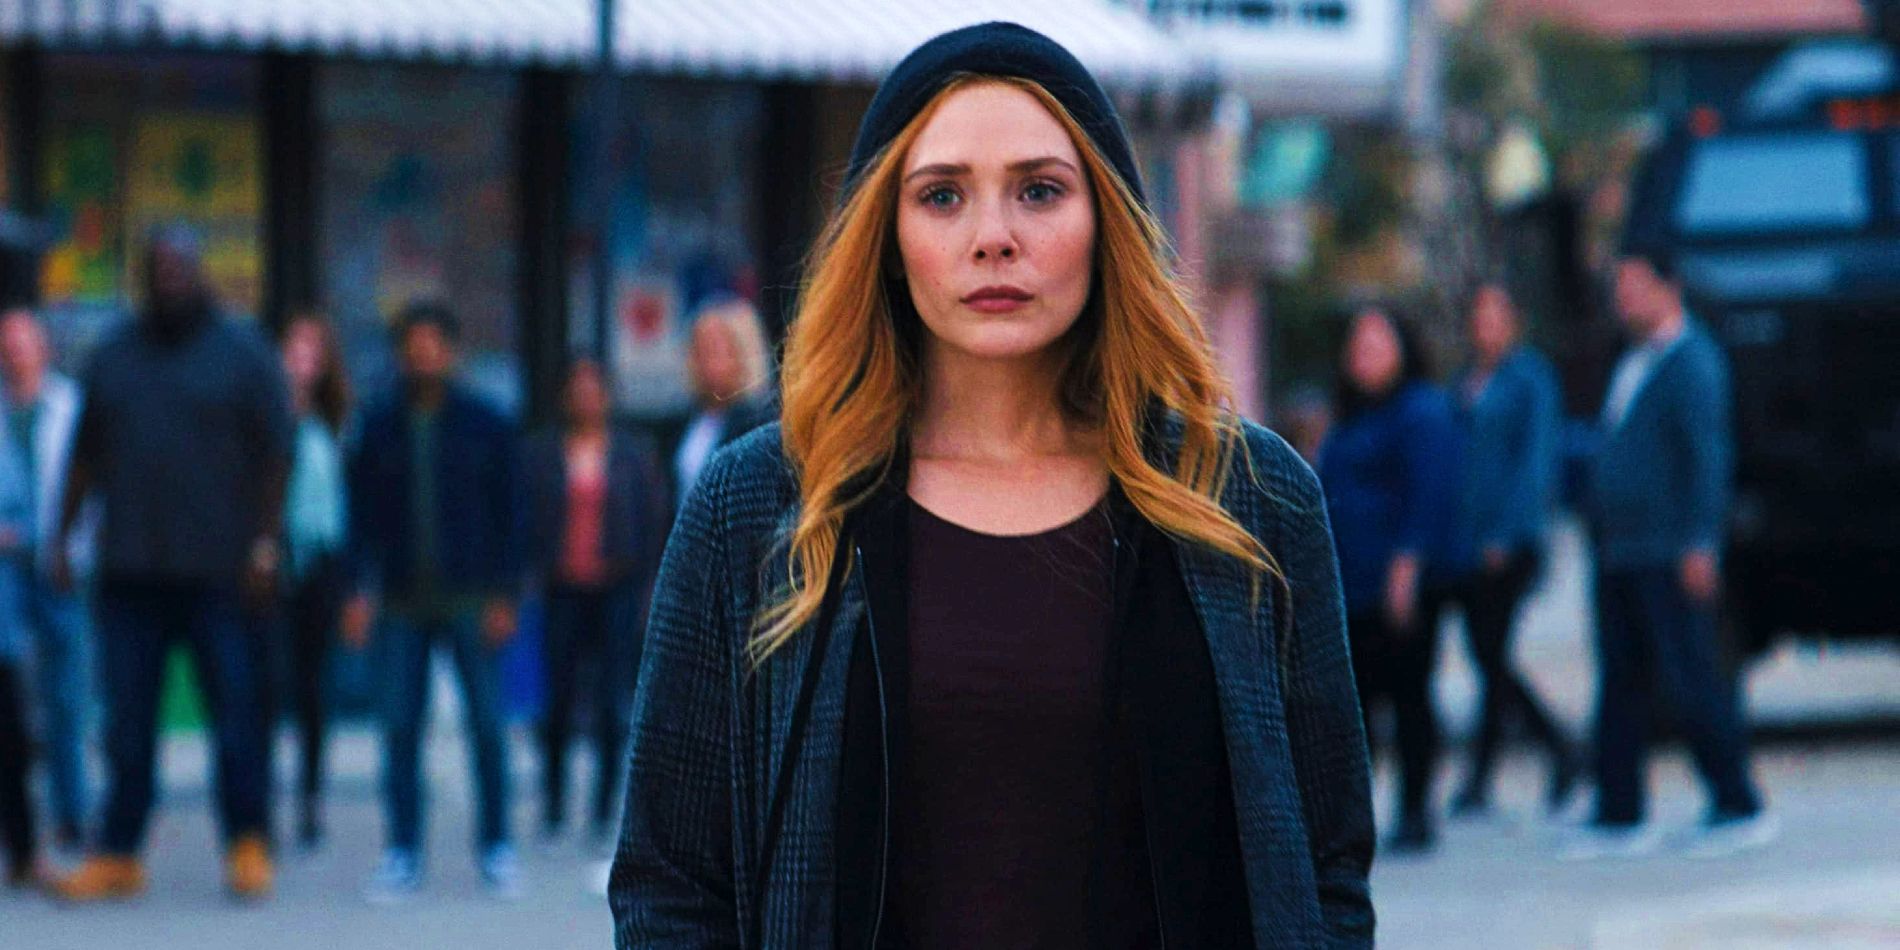 Elizabeth Olsen as Wanda Maximoff Scarlet Witch standing in Westview street at the end of WandaVision